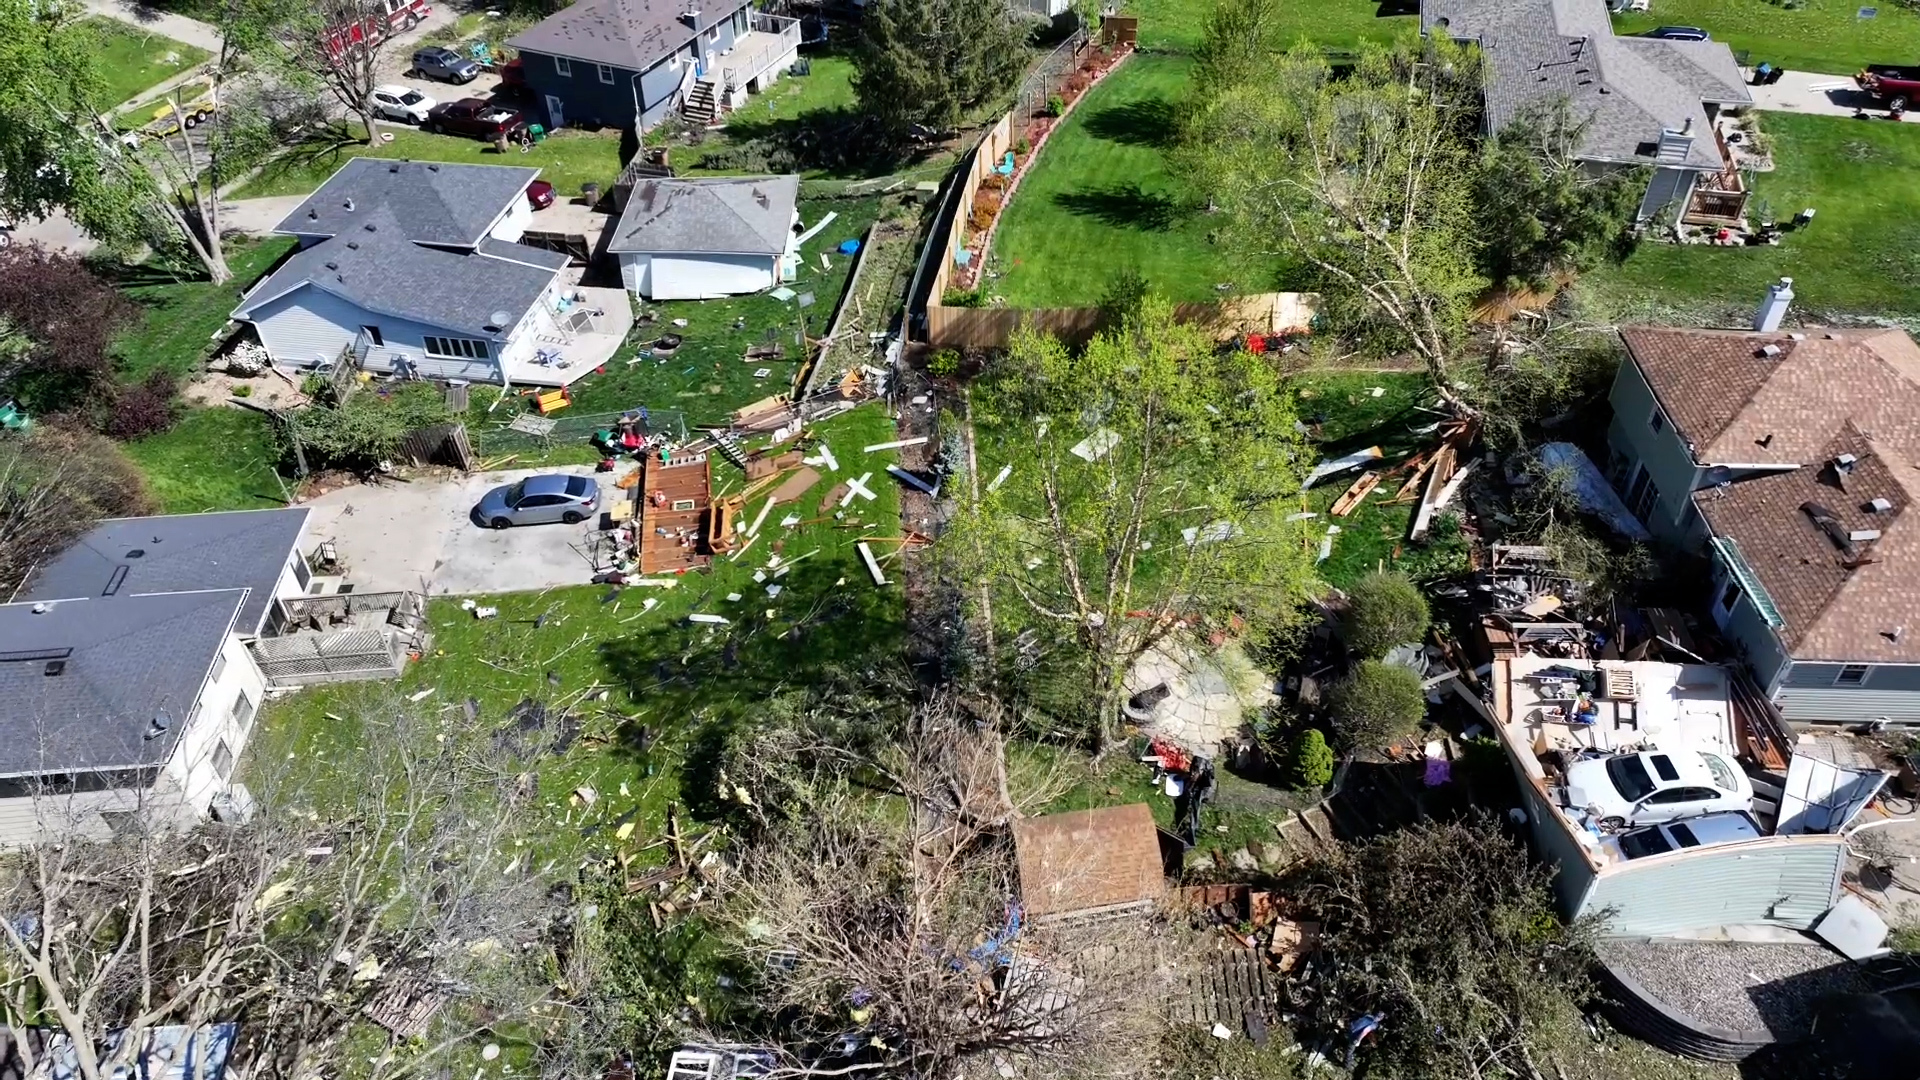 The National Weather Service says preliminary data shows a tornado in Pleasant Hill, Iowa on Friday, April 26 was an EF-2 with estimated peak winds of 125 mph.